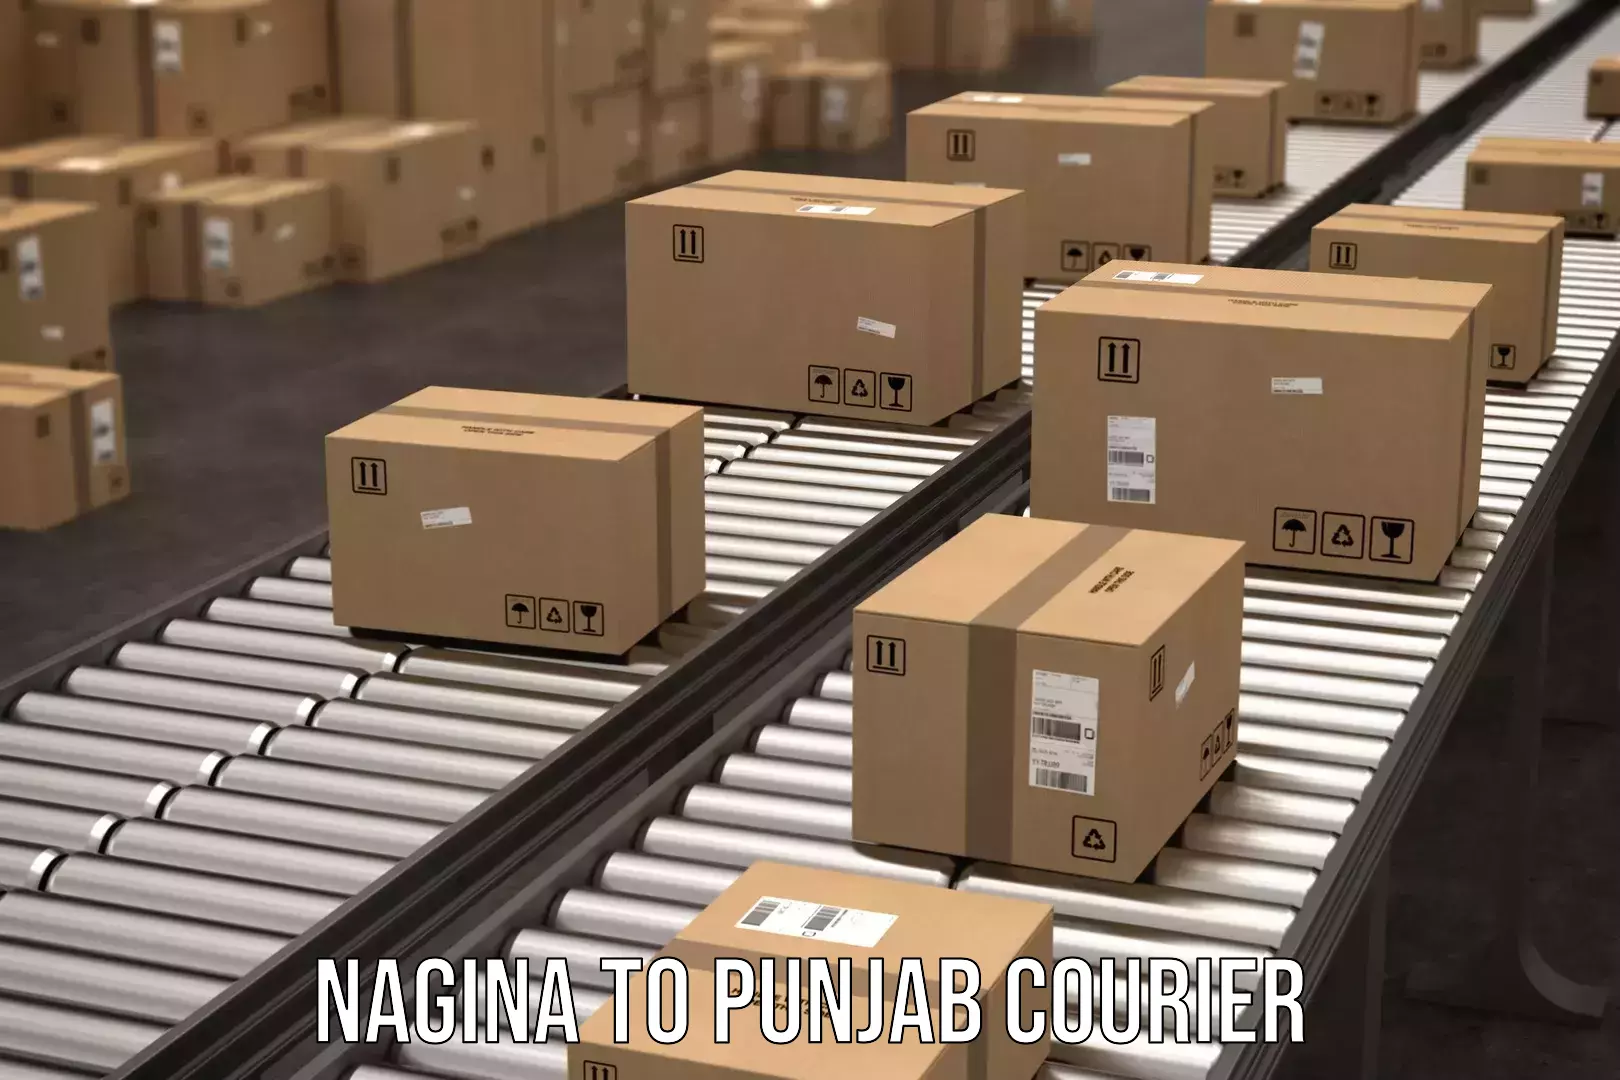 Round-the-clock parcel delivery Nagina to Punjab